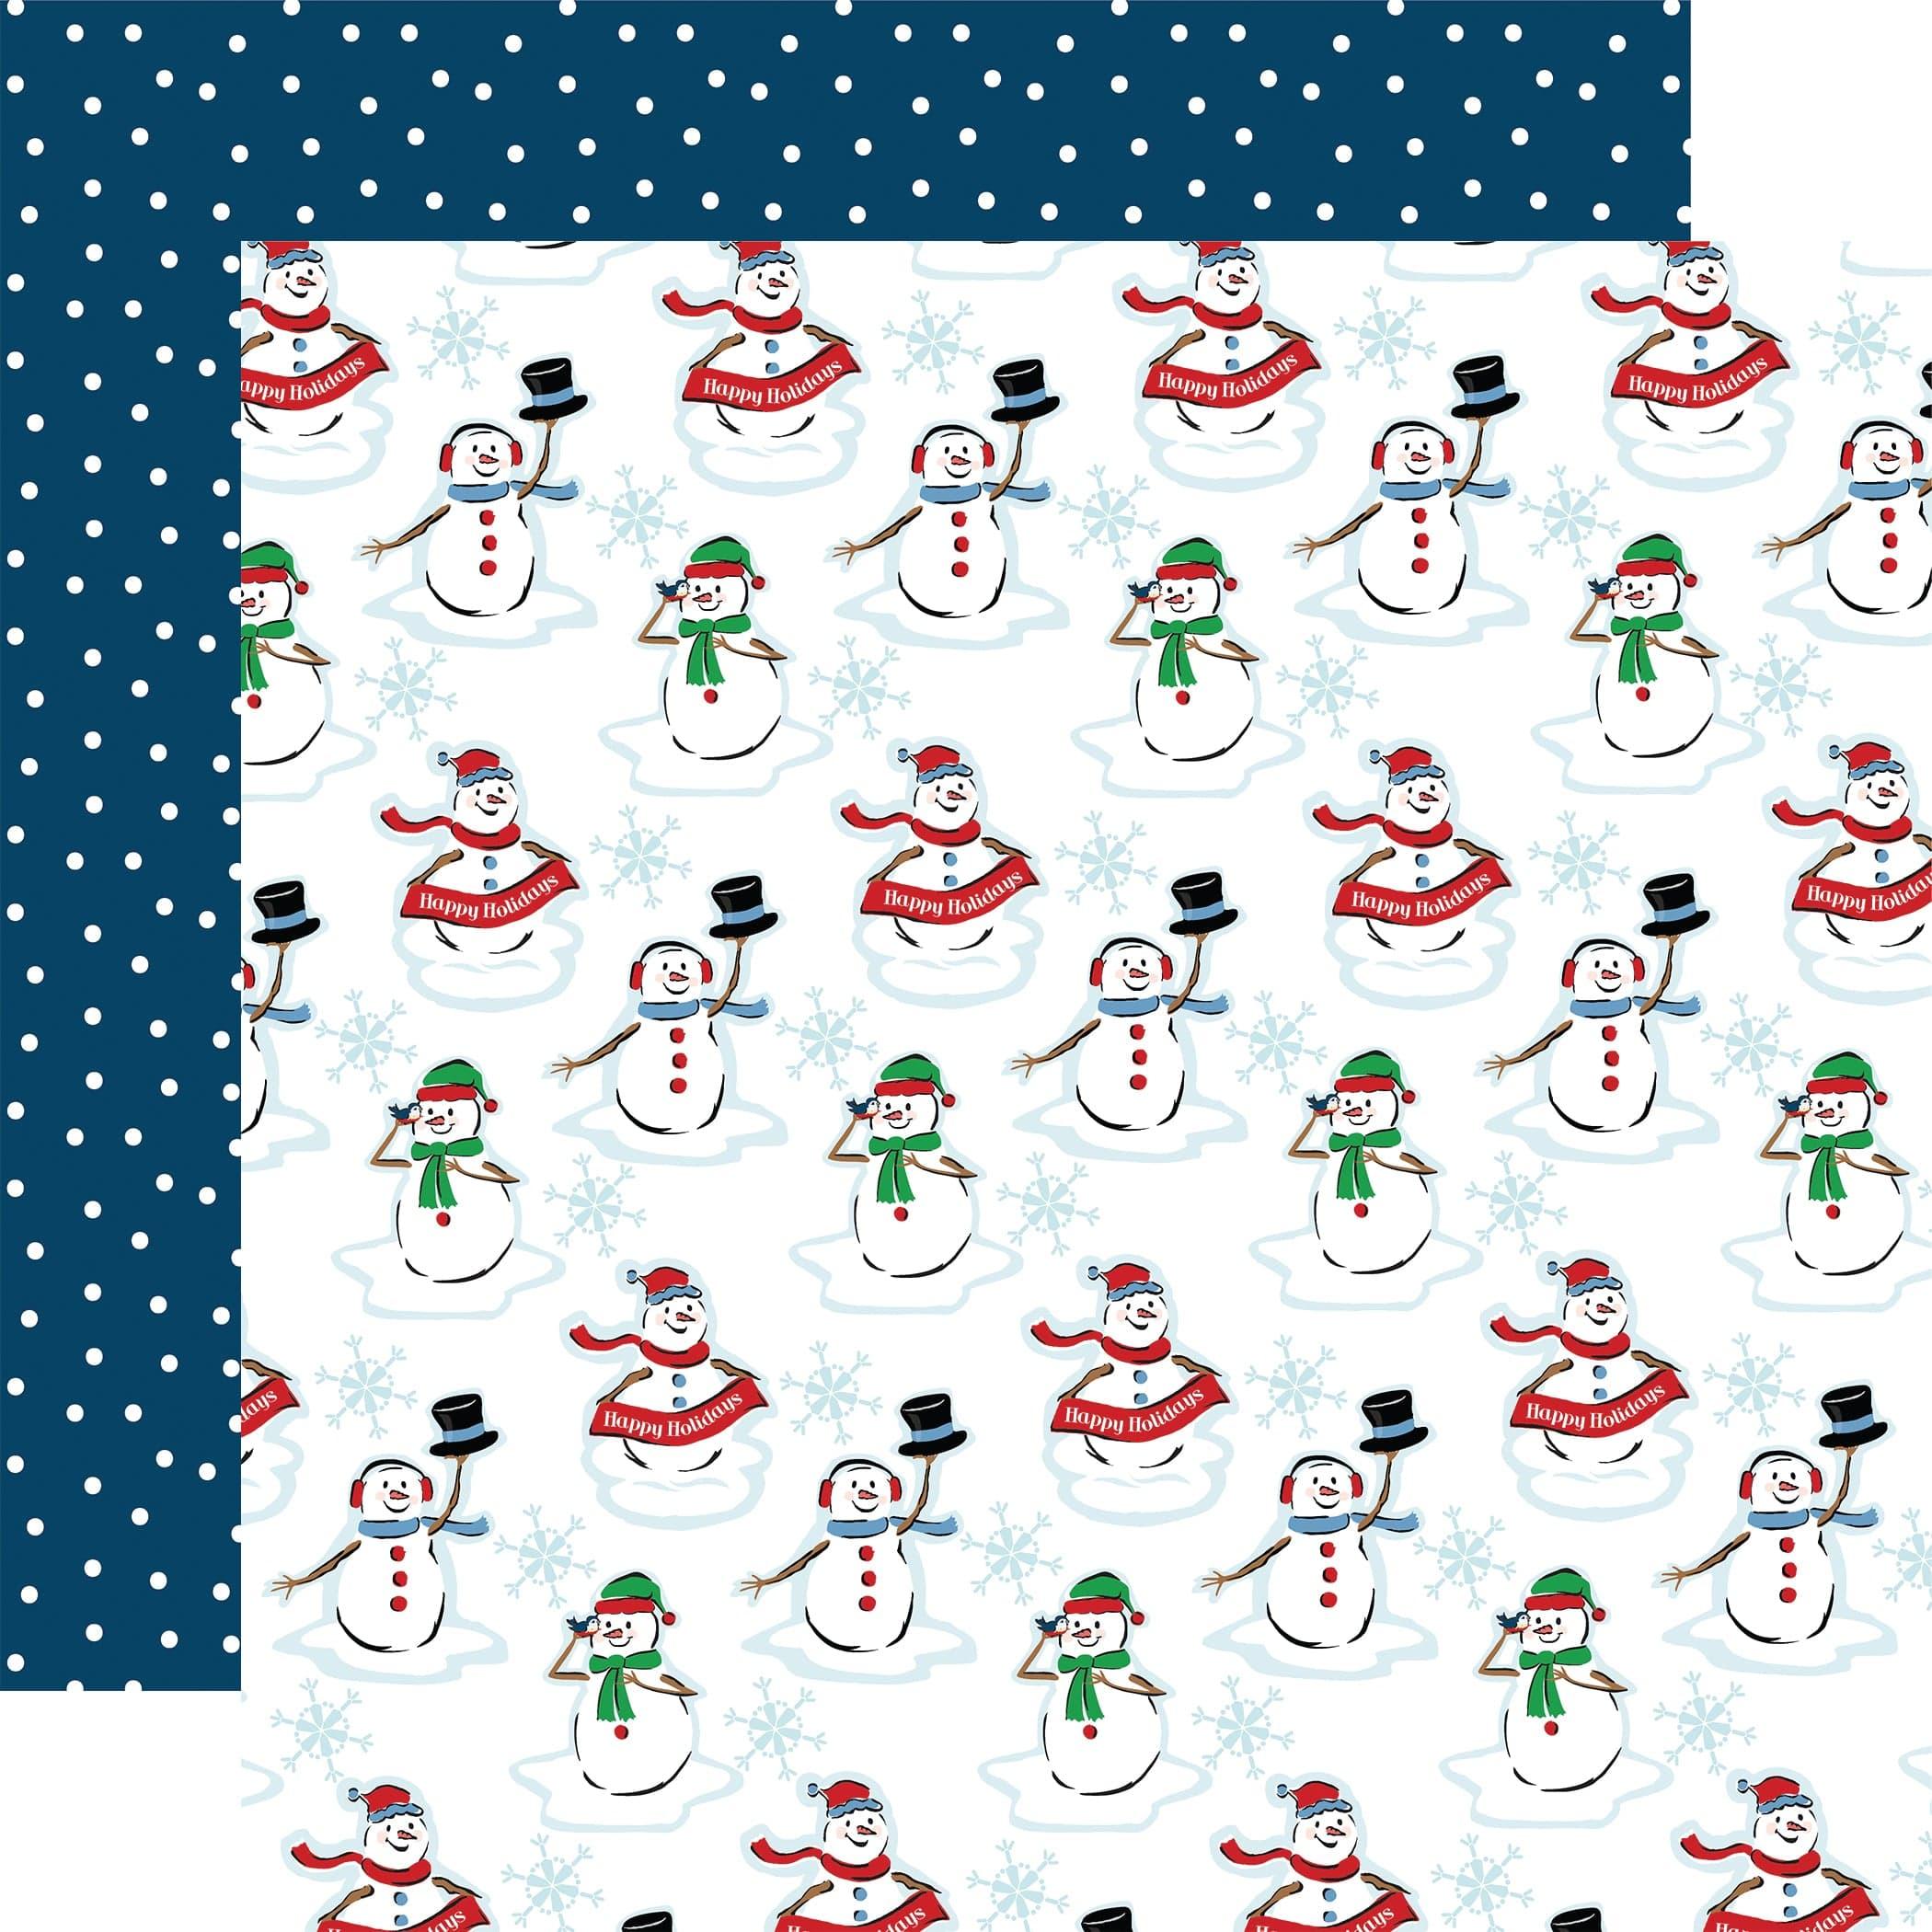 White Christmas Collection Welcoming Snow 12 x 12 Double-Sided Scrapbook Paper by Carta Bella - Scrapbook Supply Companies